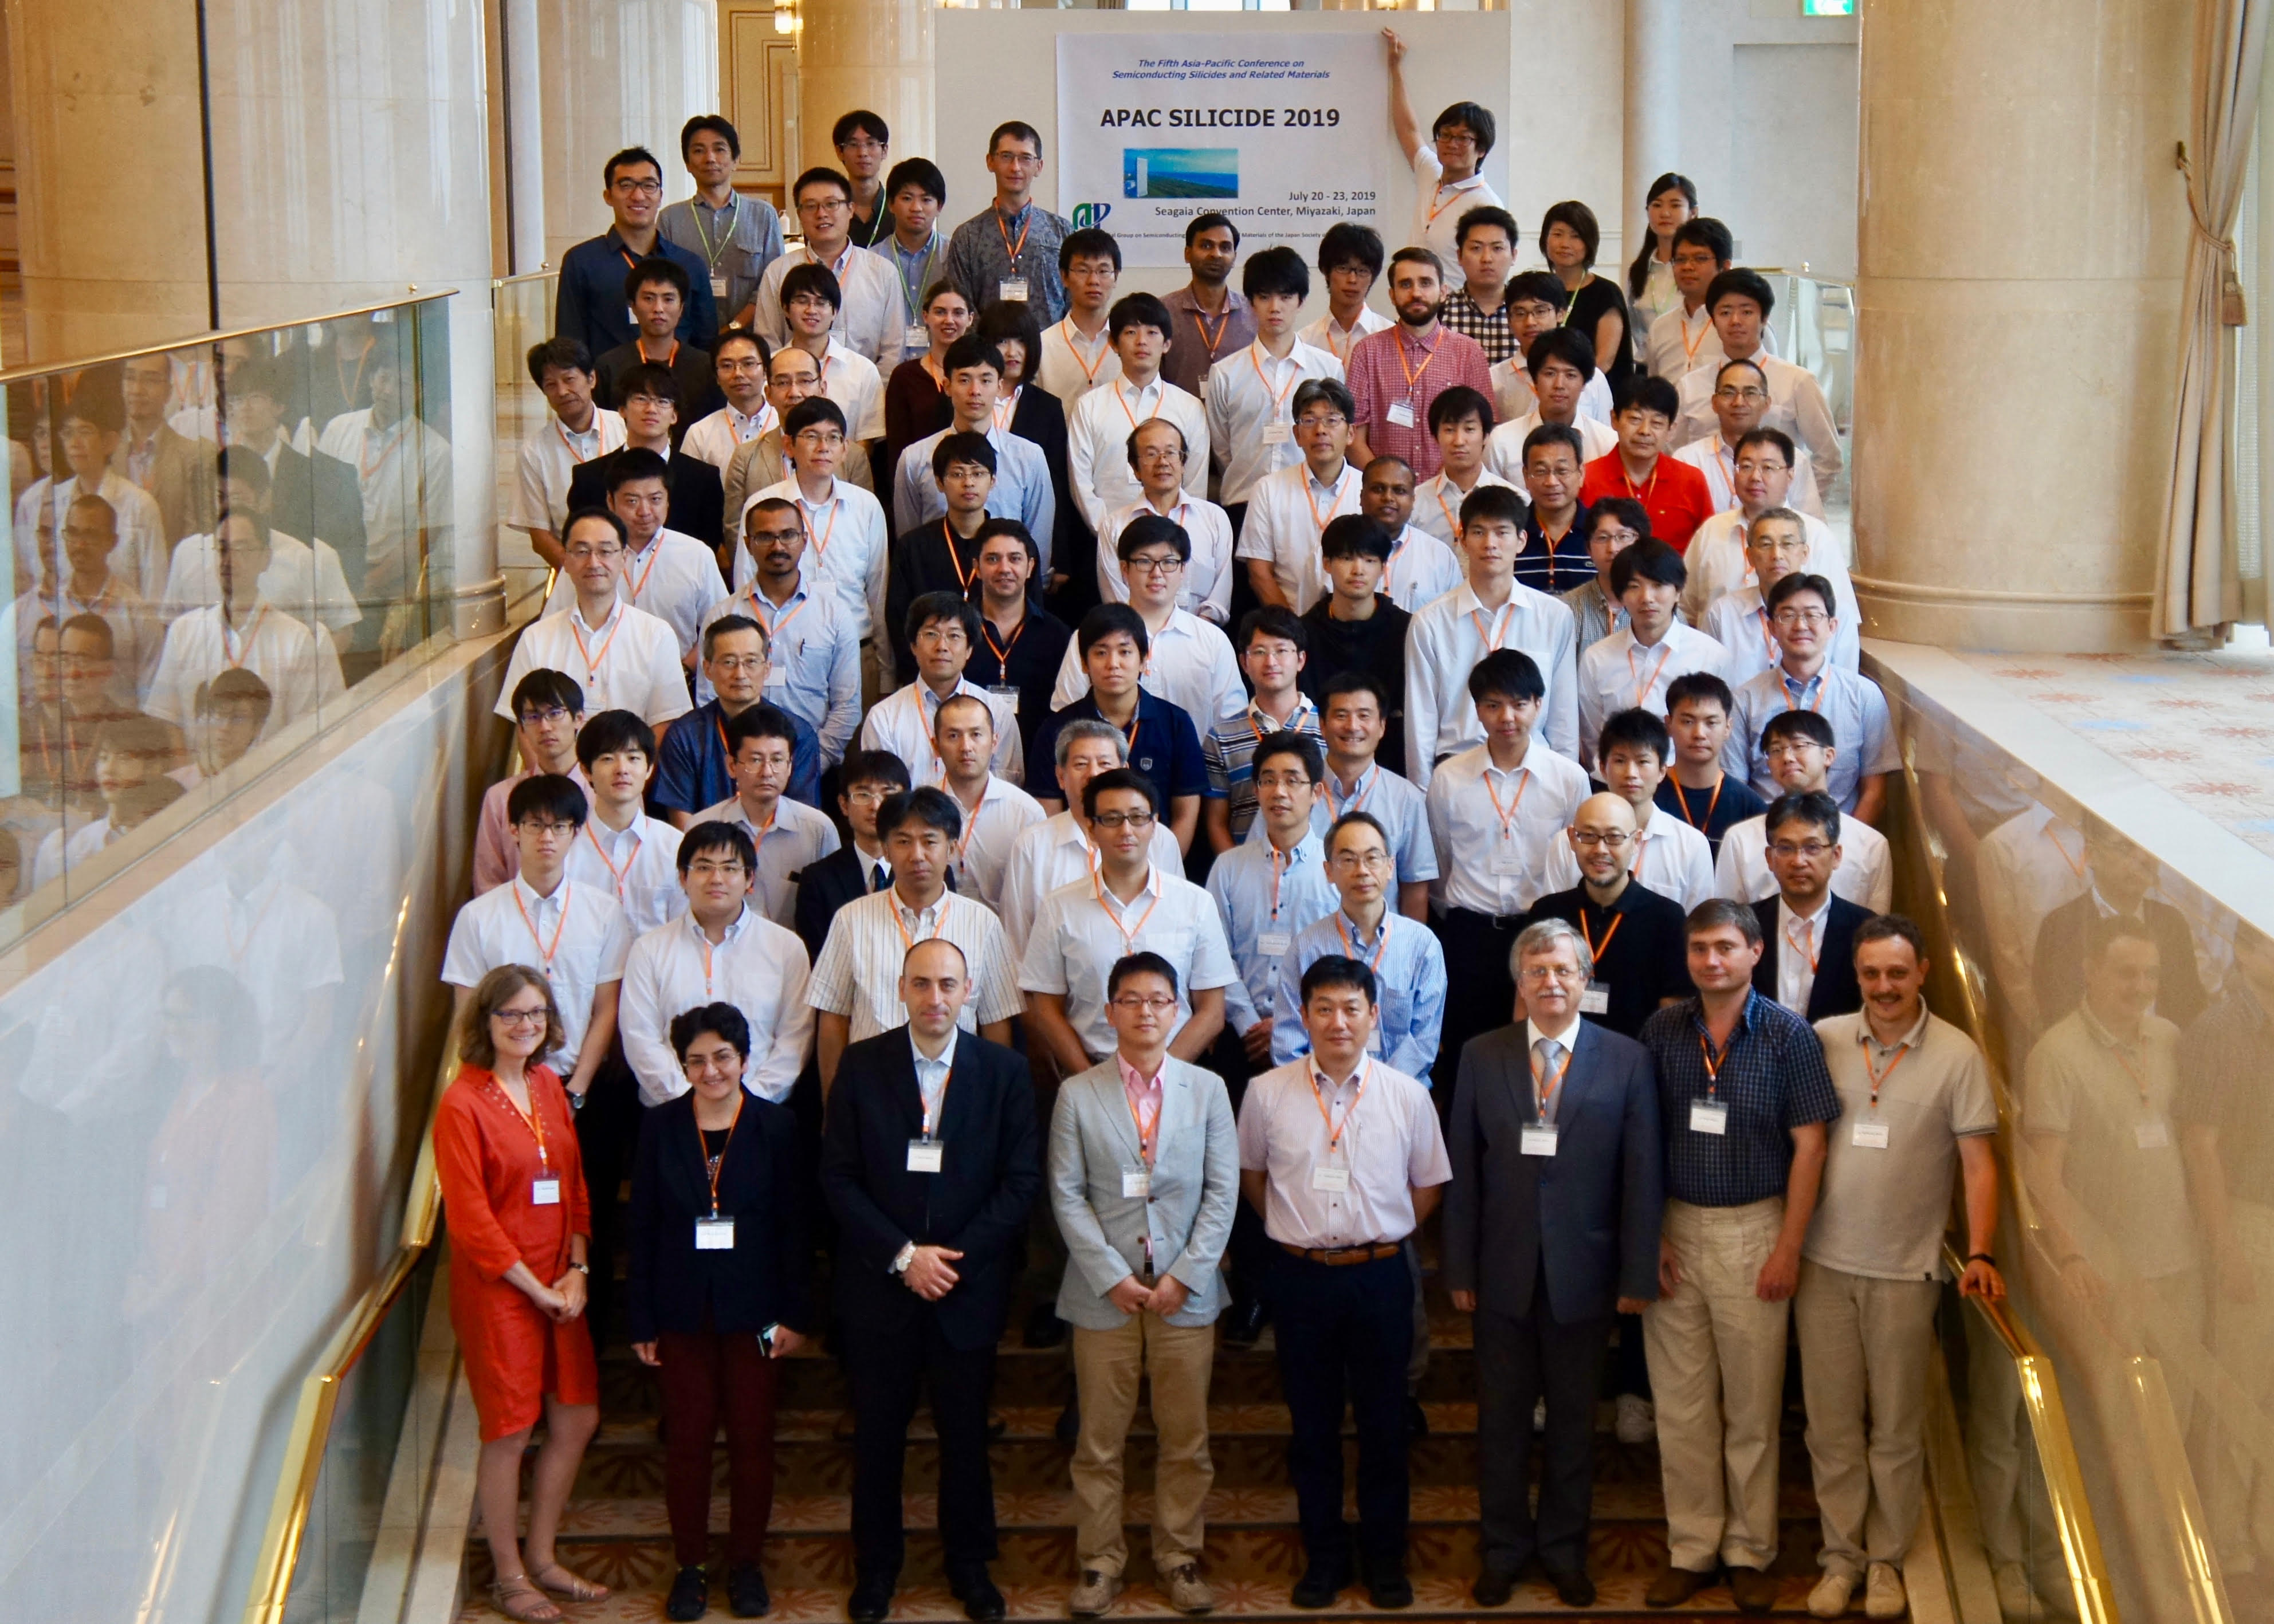 Conference Photo - APAC SILICIDE 2019